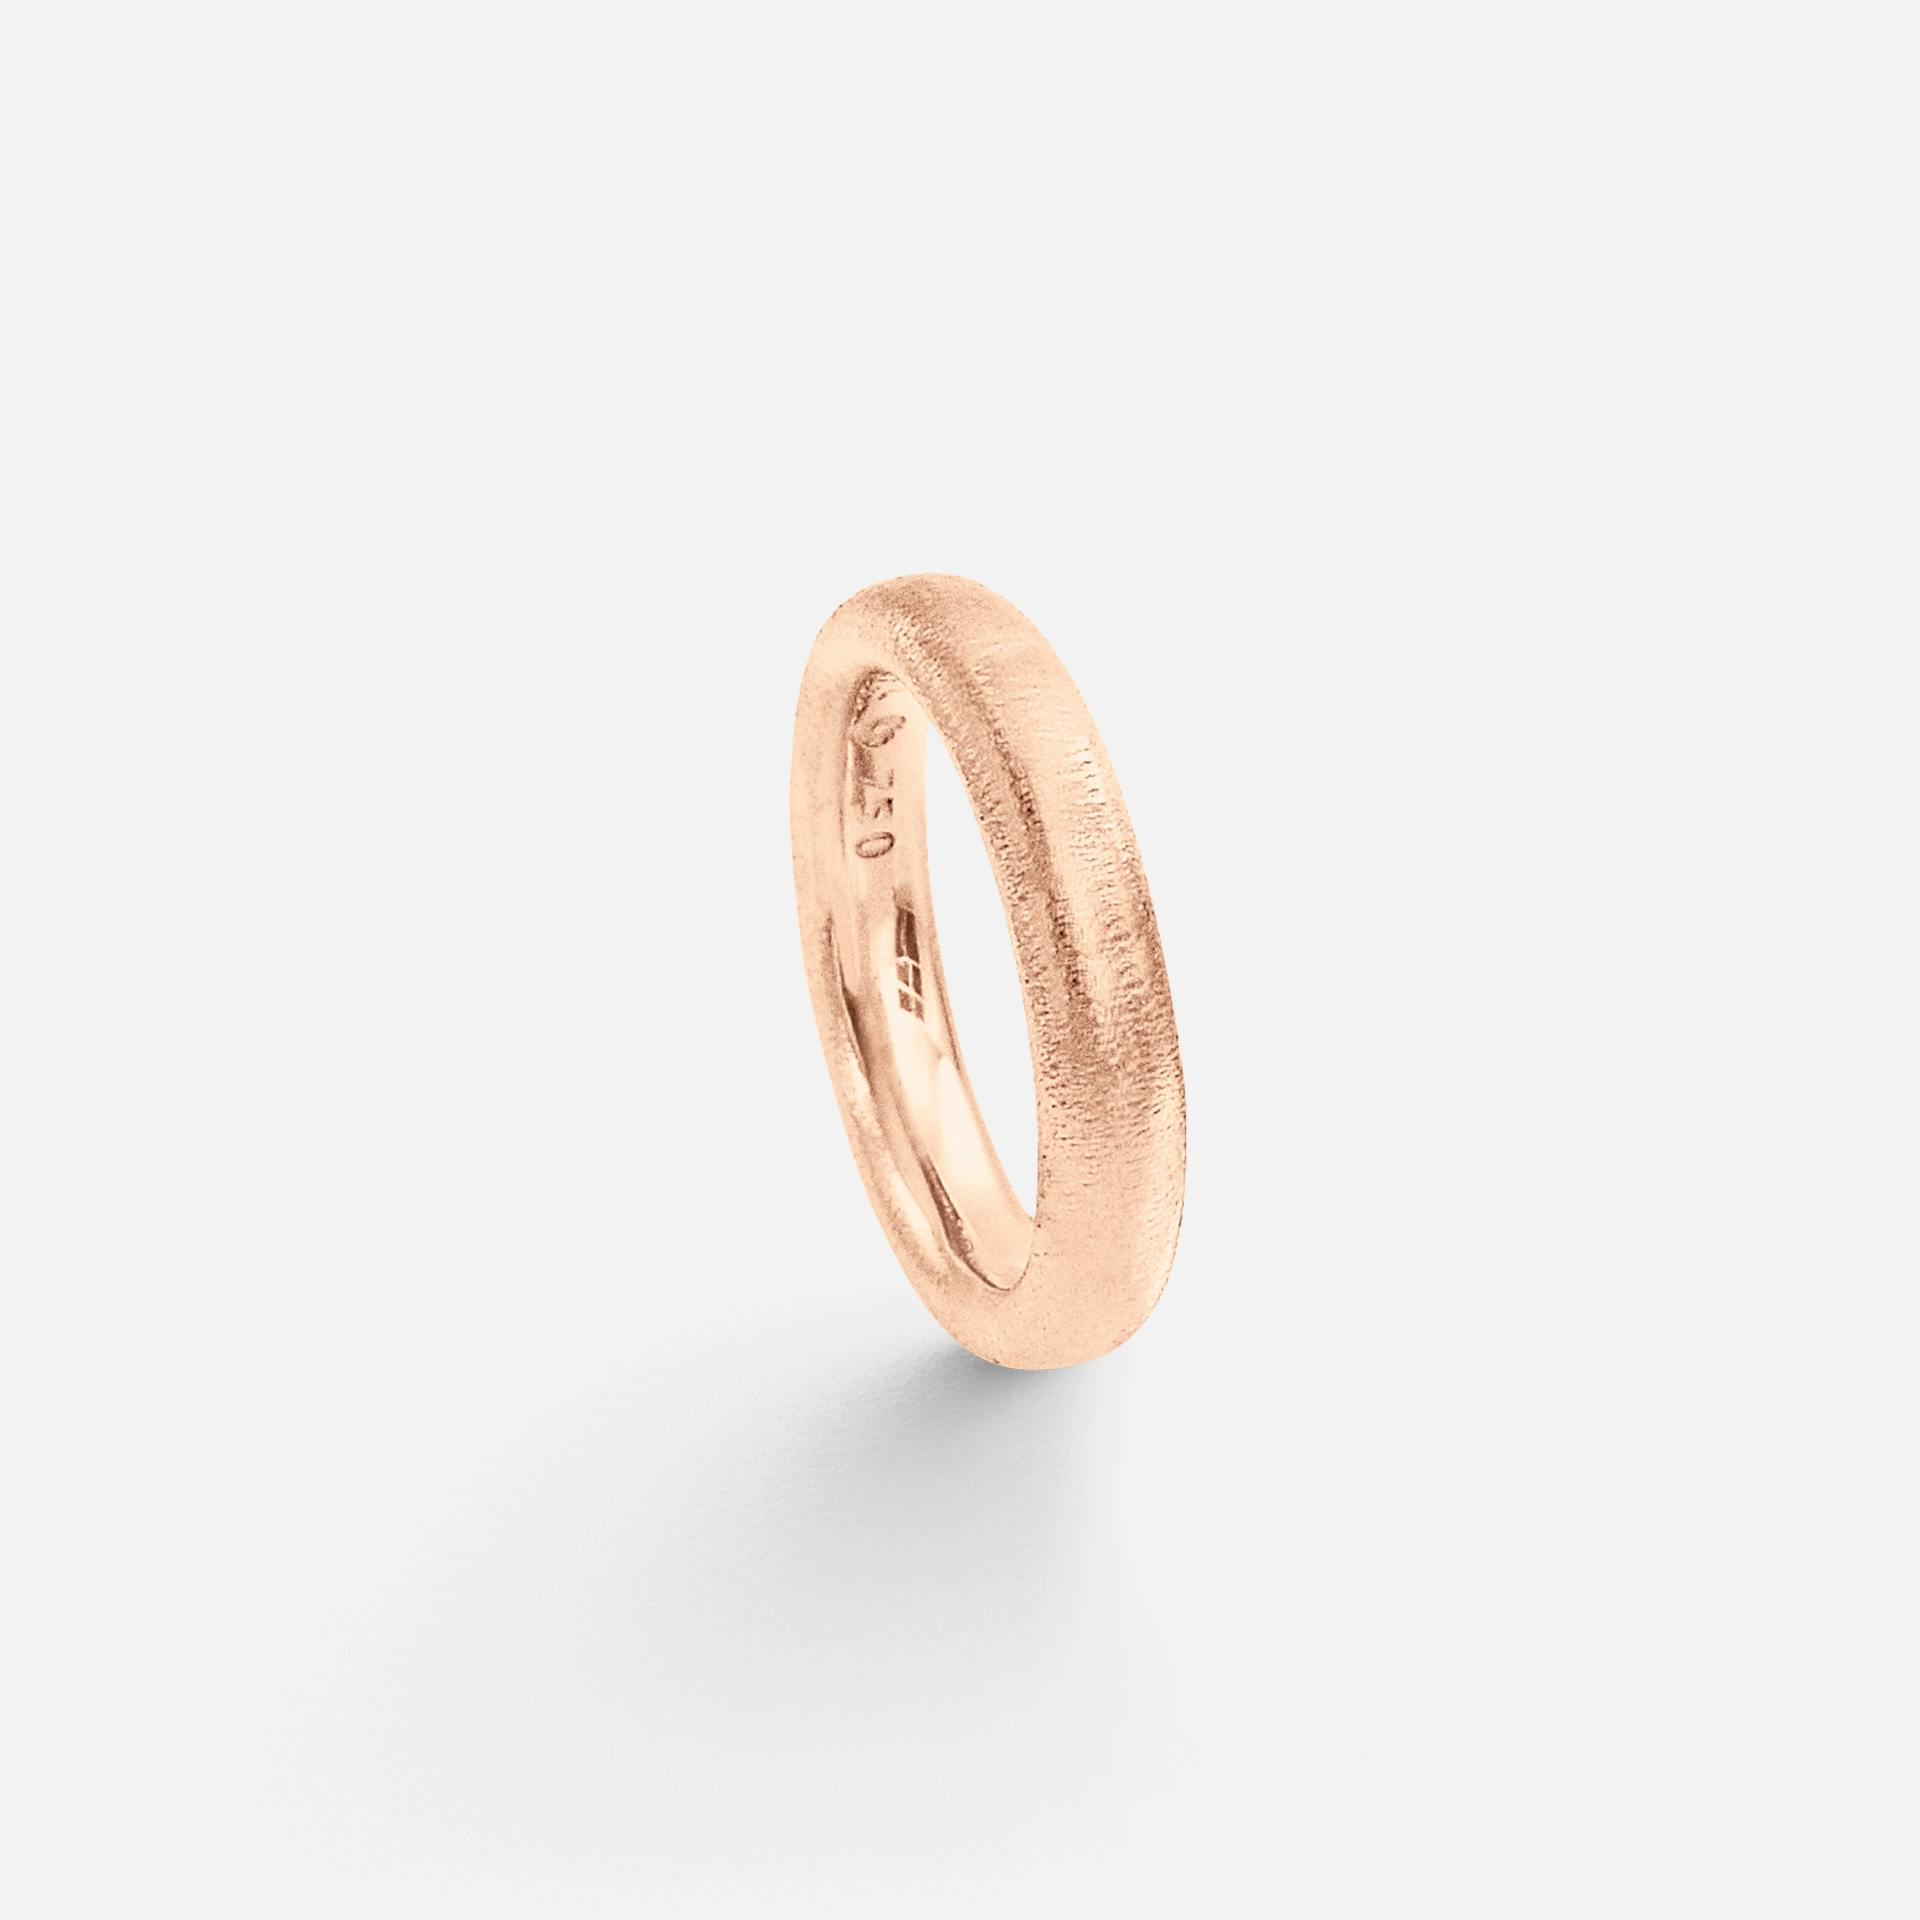 The Ring 4 mm 18k textured rose gold